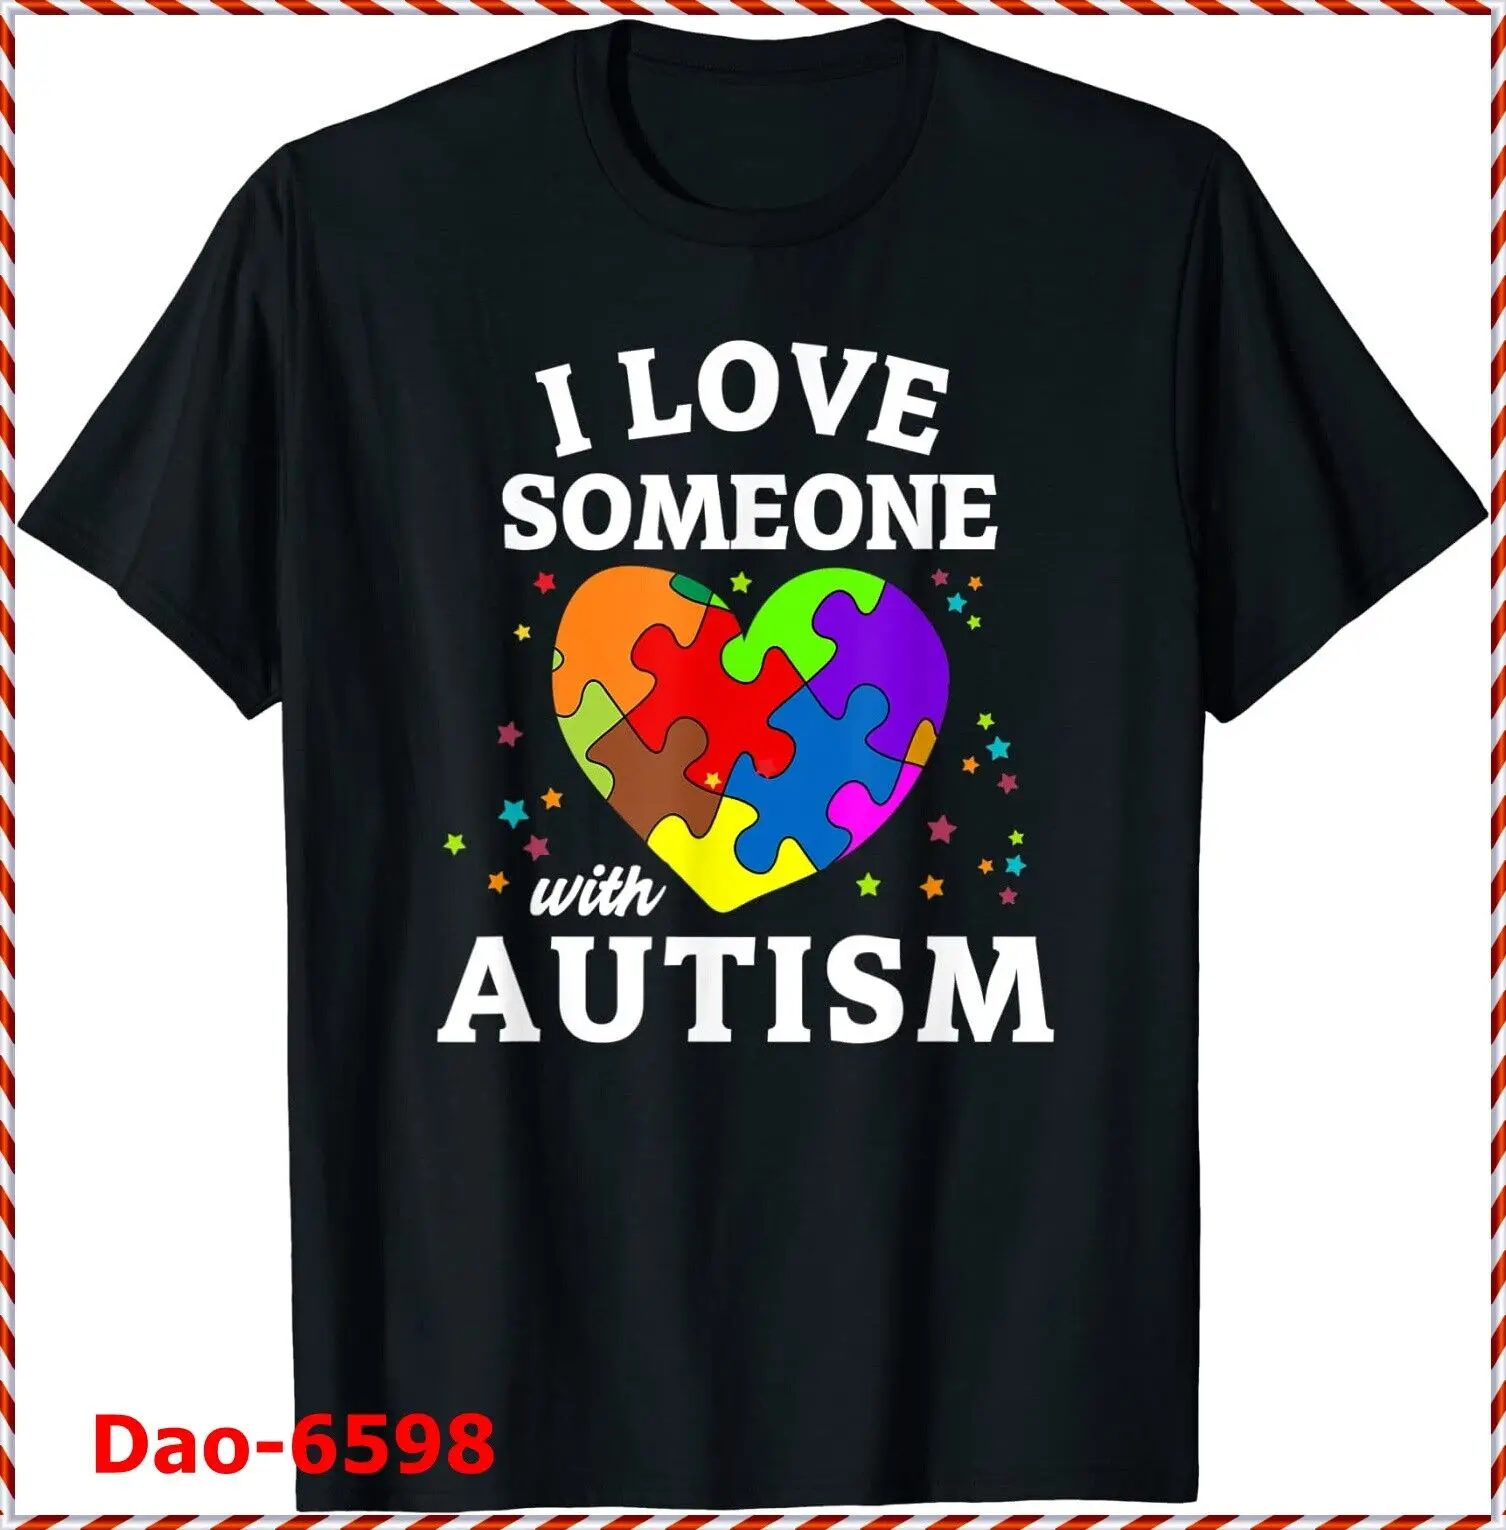 

I Love Someone with Autism O-Neck Cotton T Shirt Men Casual Short Sleeve Tees Tops Harajuku Streetwear